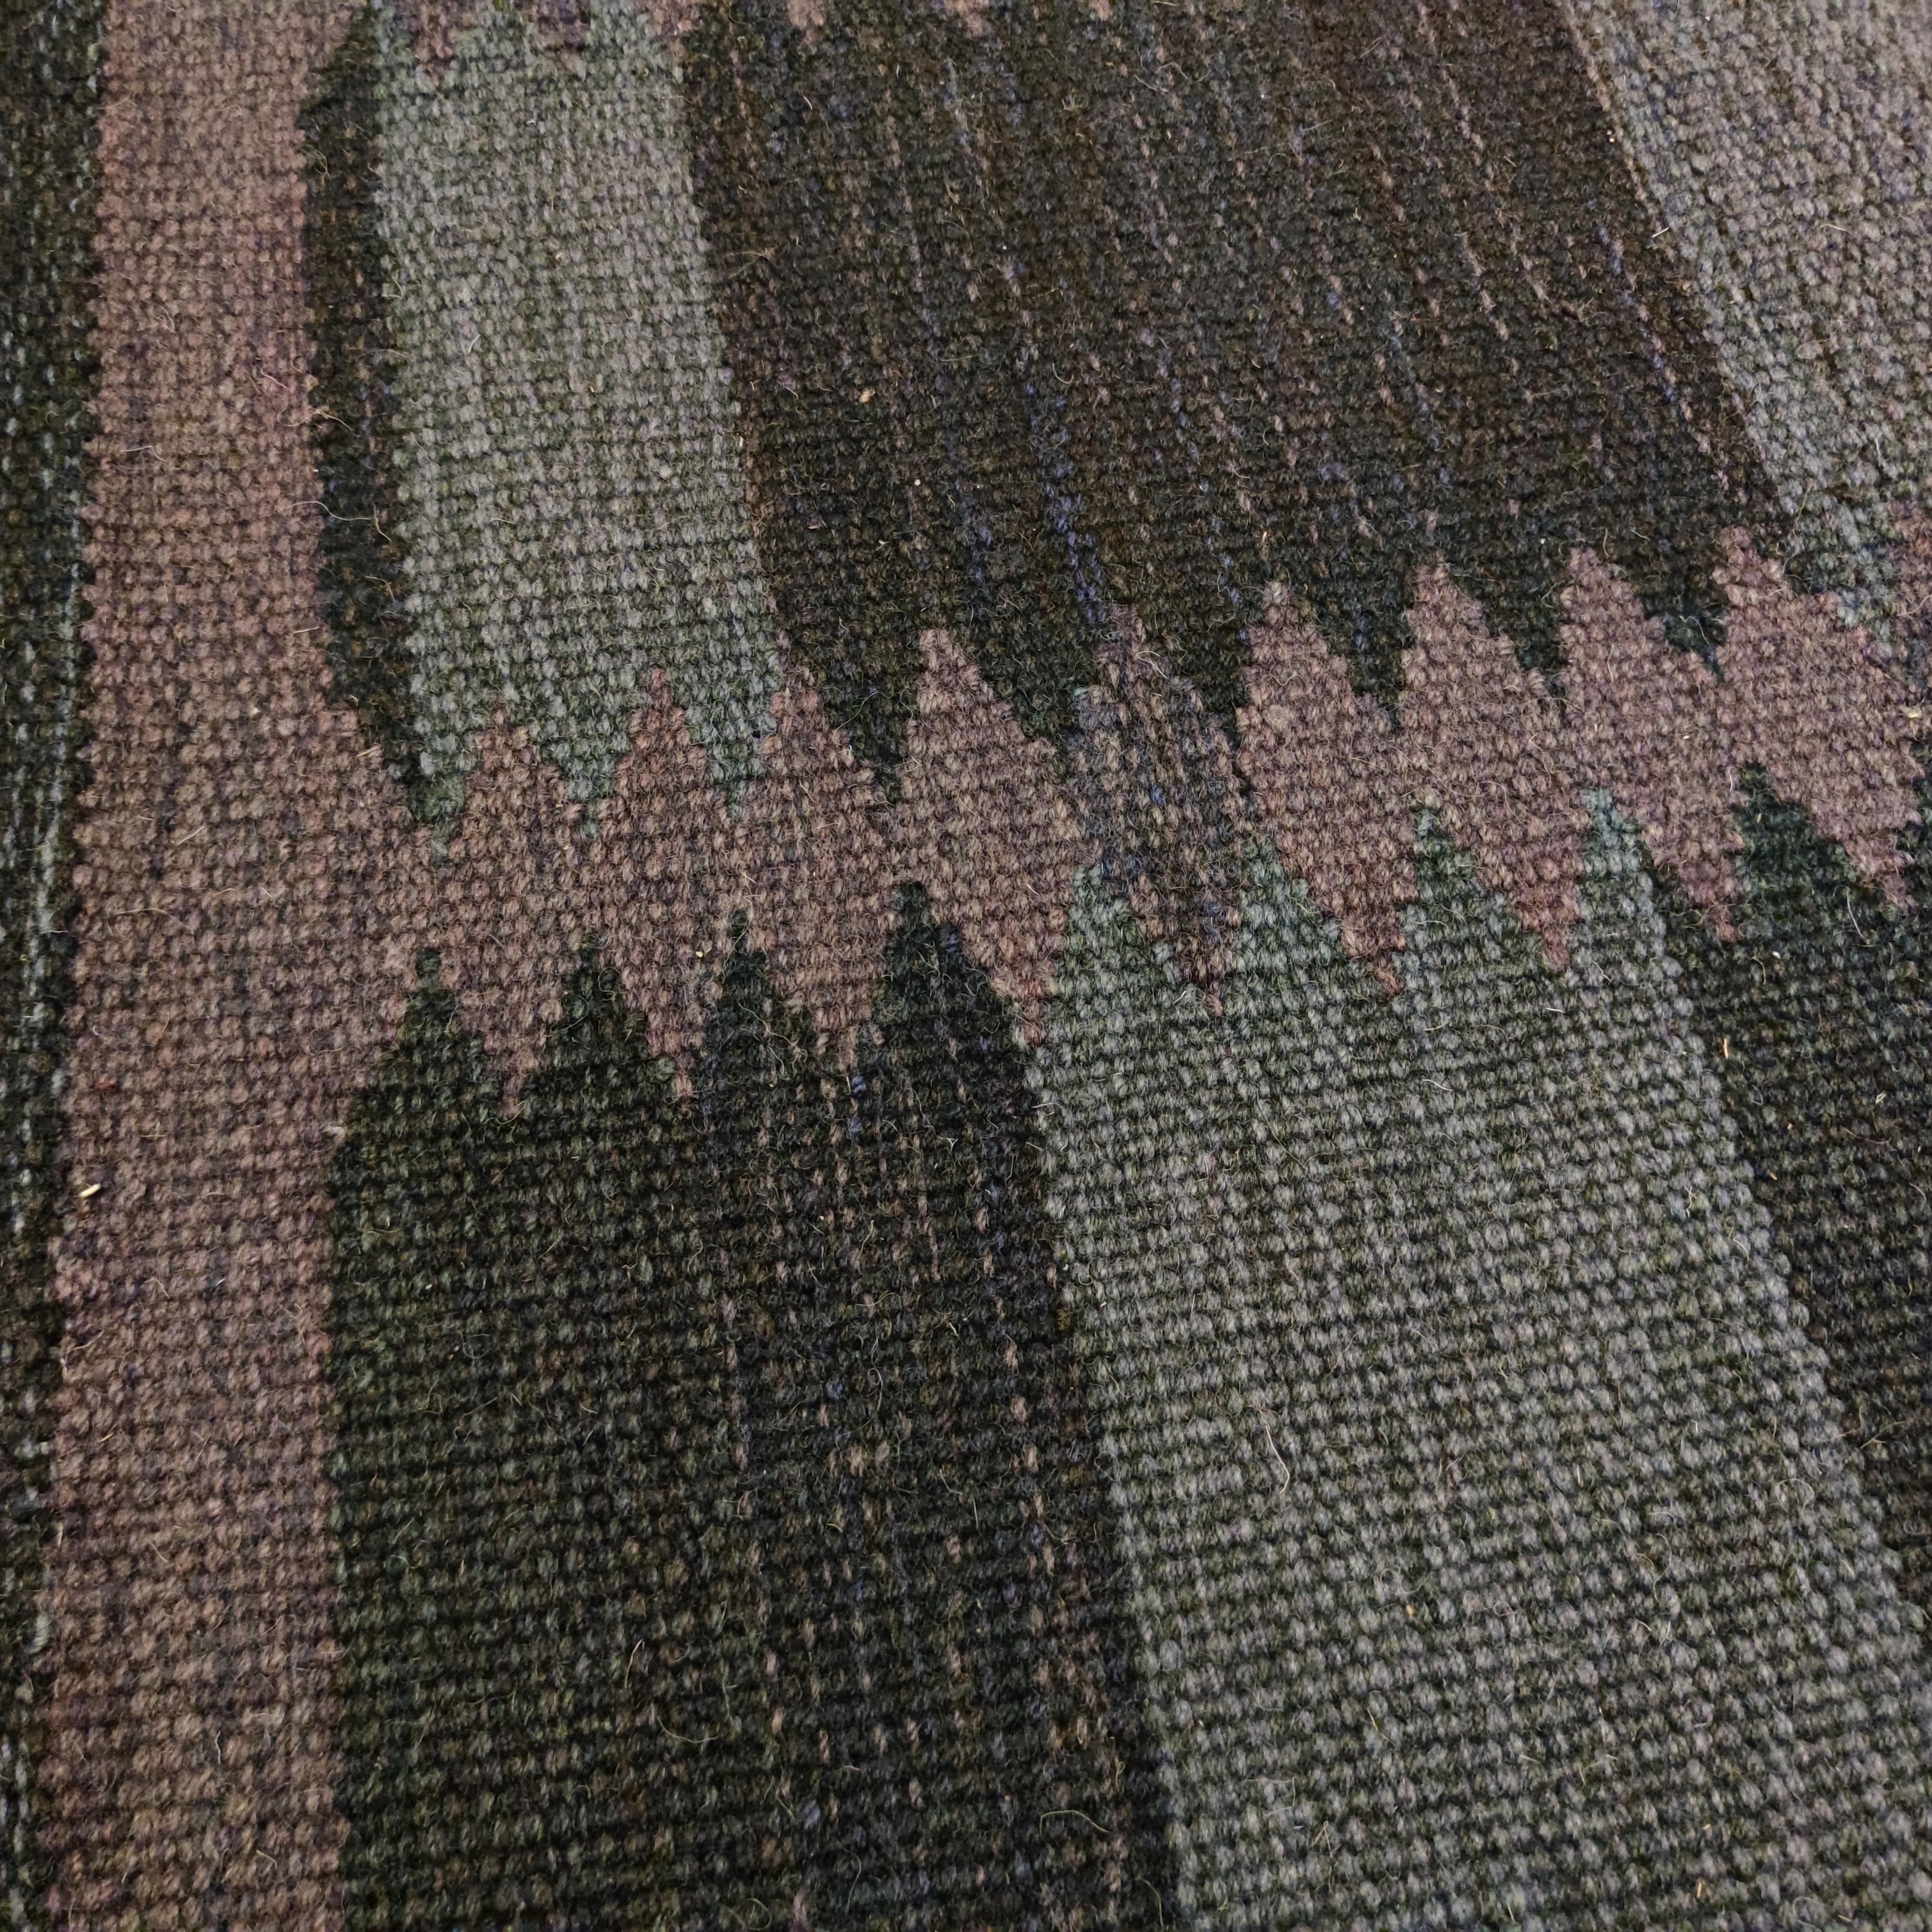 Inspired by Mid-Century Modern Swedish carpets, this kilim is part of our contemporary collection of textured flat weaves where the material is employed in such a way as to create a sturdy rug that can be beautifully juxtaposed in today's interiors.